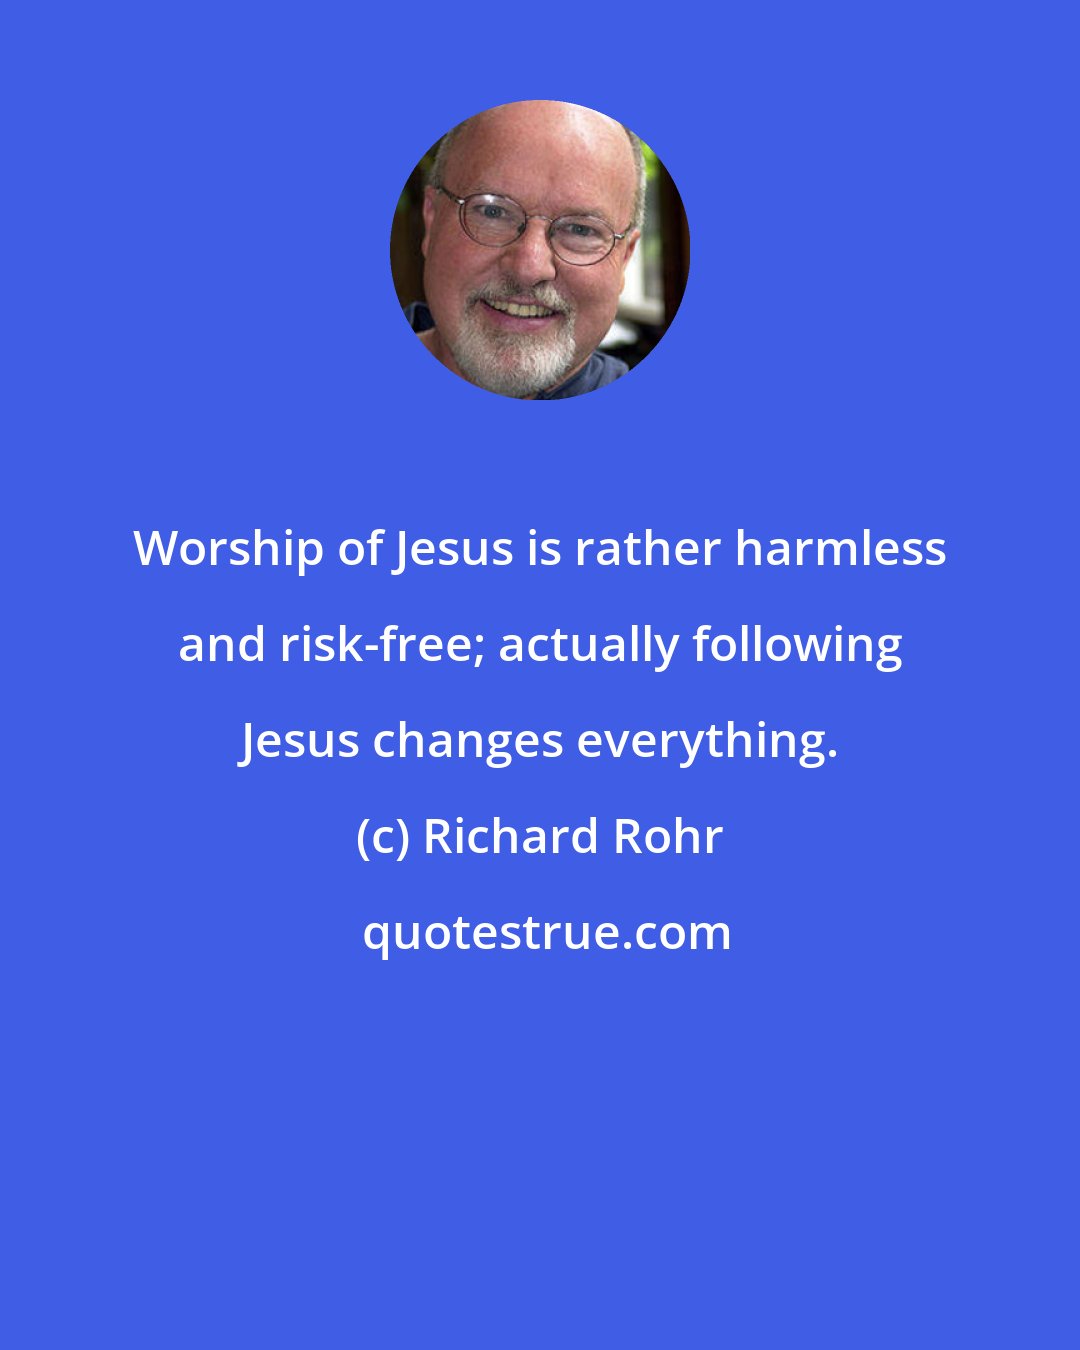 Richard Rohr: Worship of Jesus is rather harmless and risk-free; actually following Jesus changes everything.